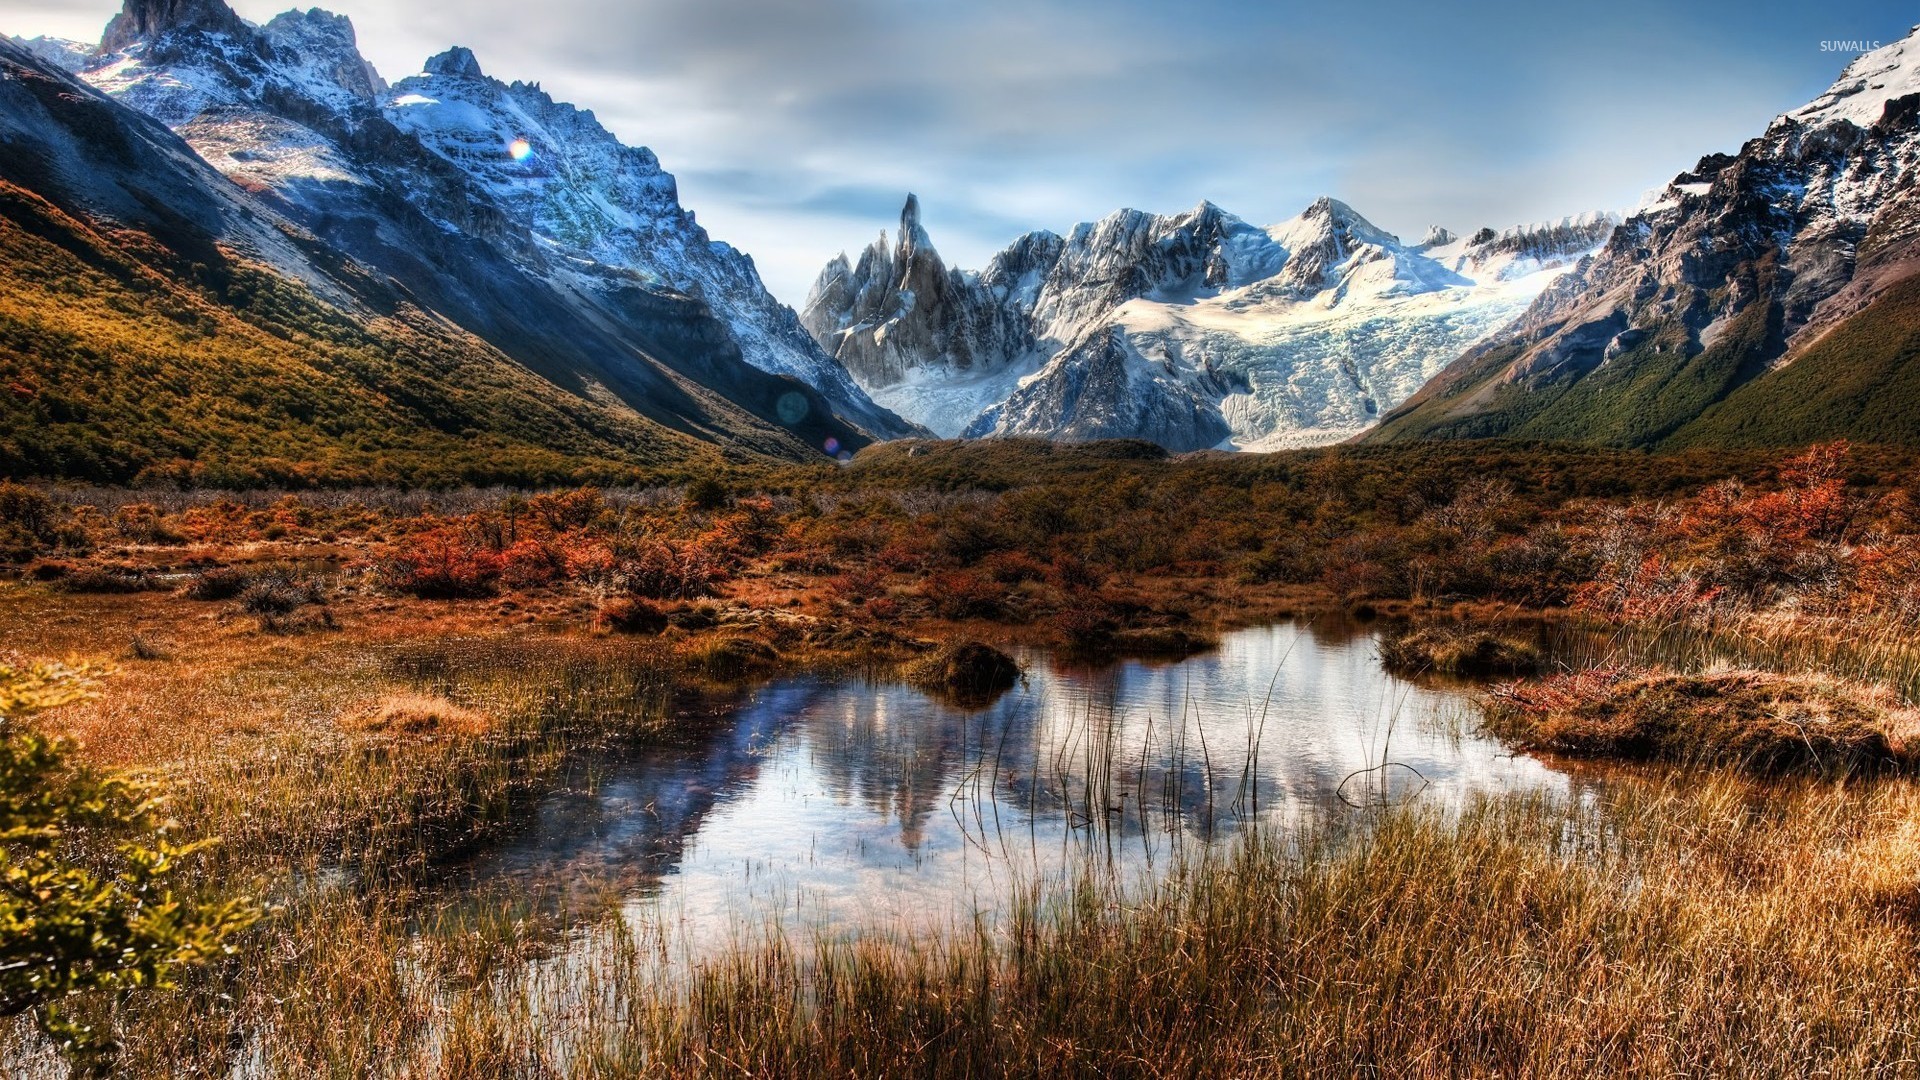 Andes, Argentina wallpaper - Nature wallpapers - #25958